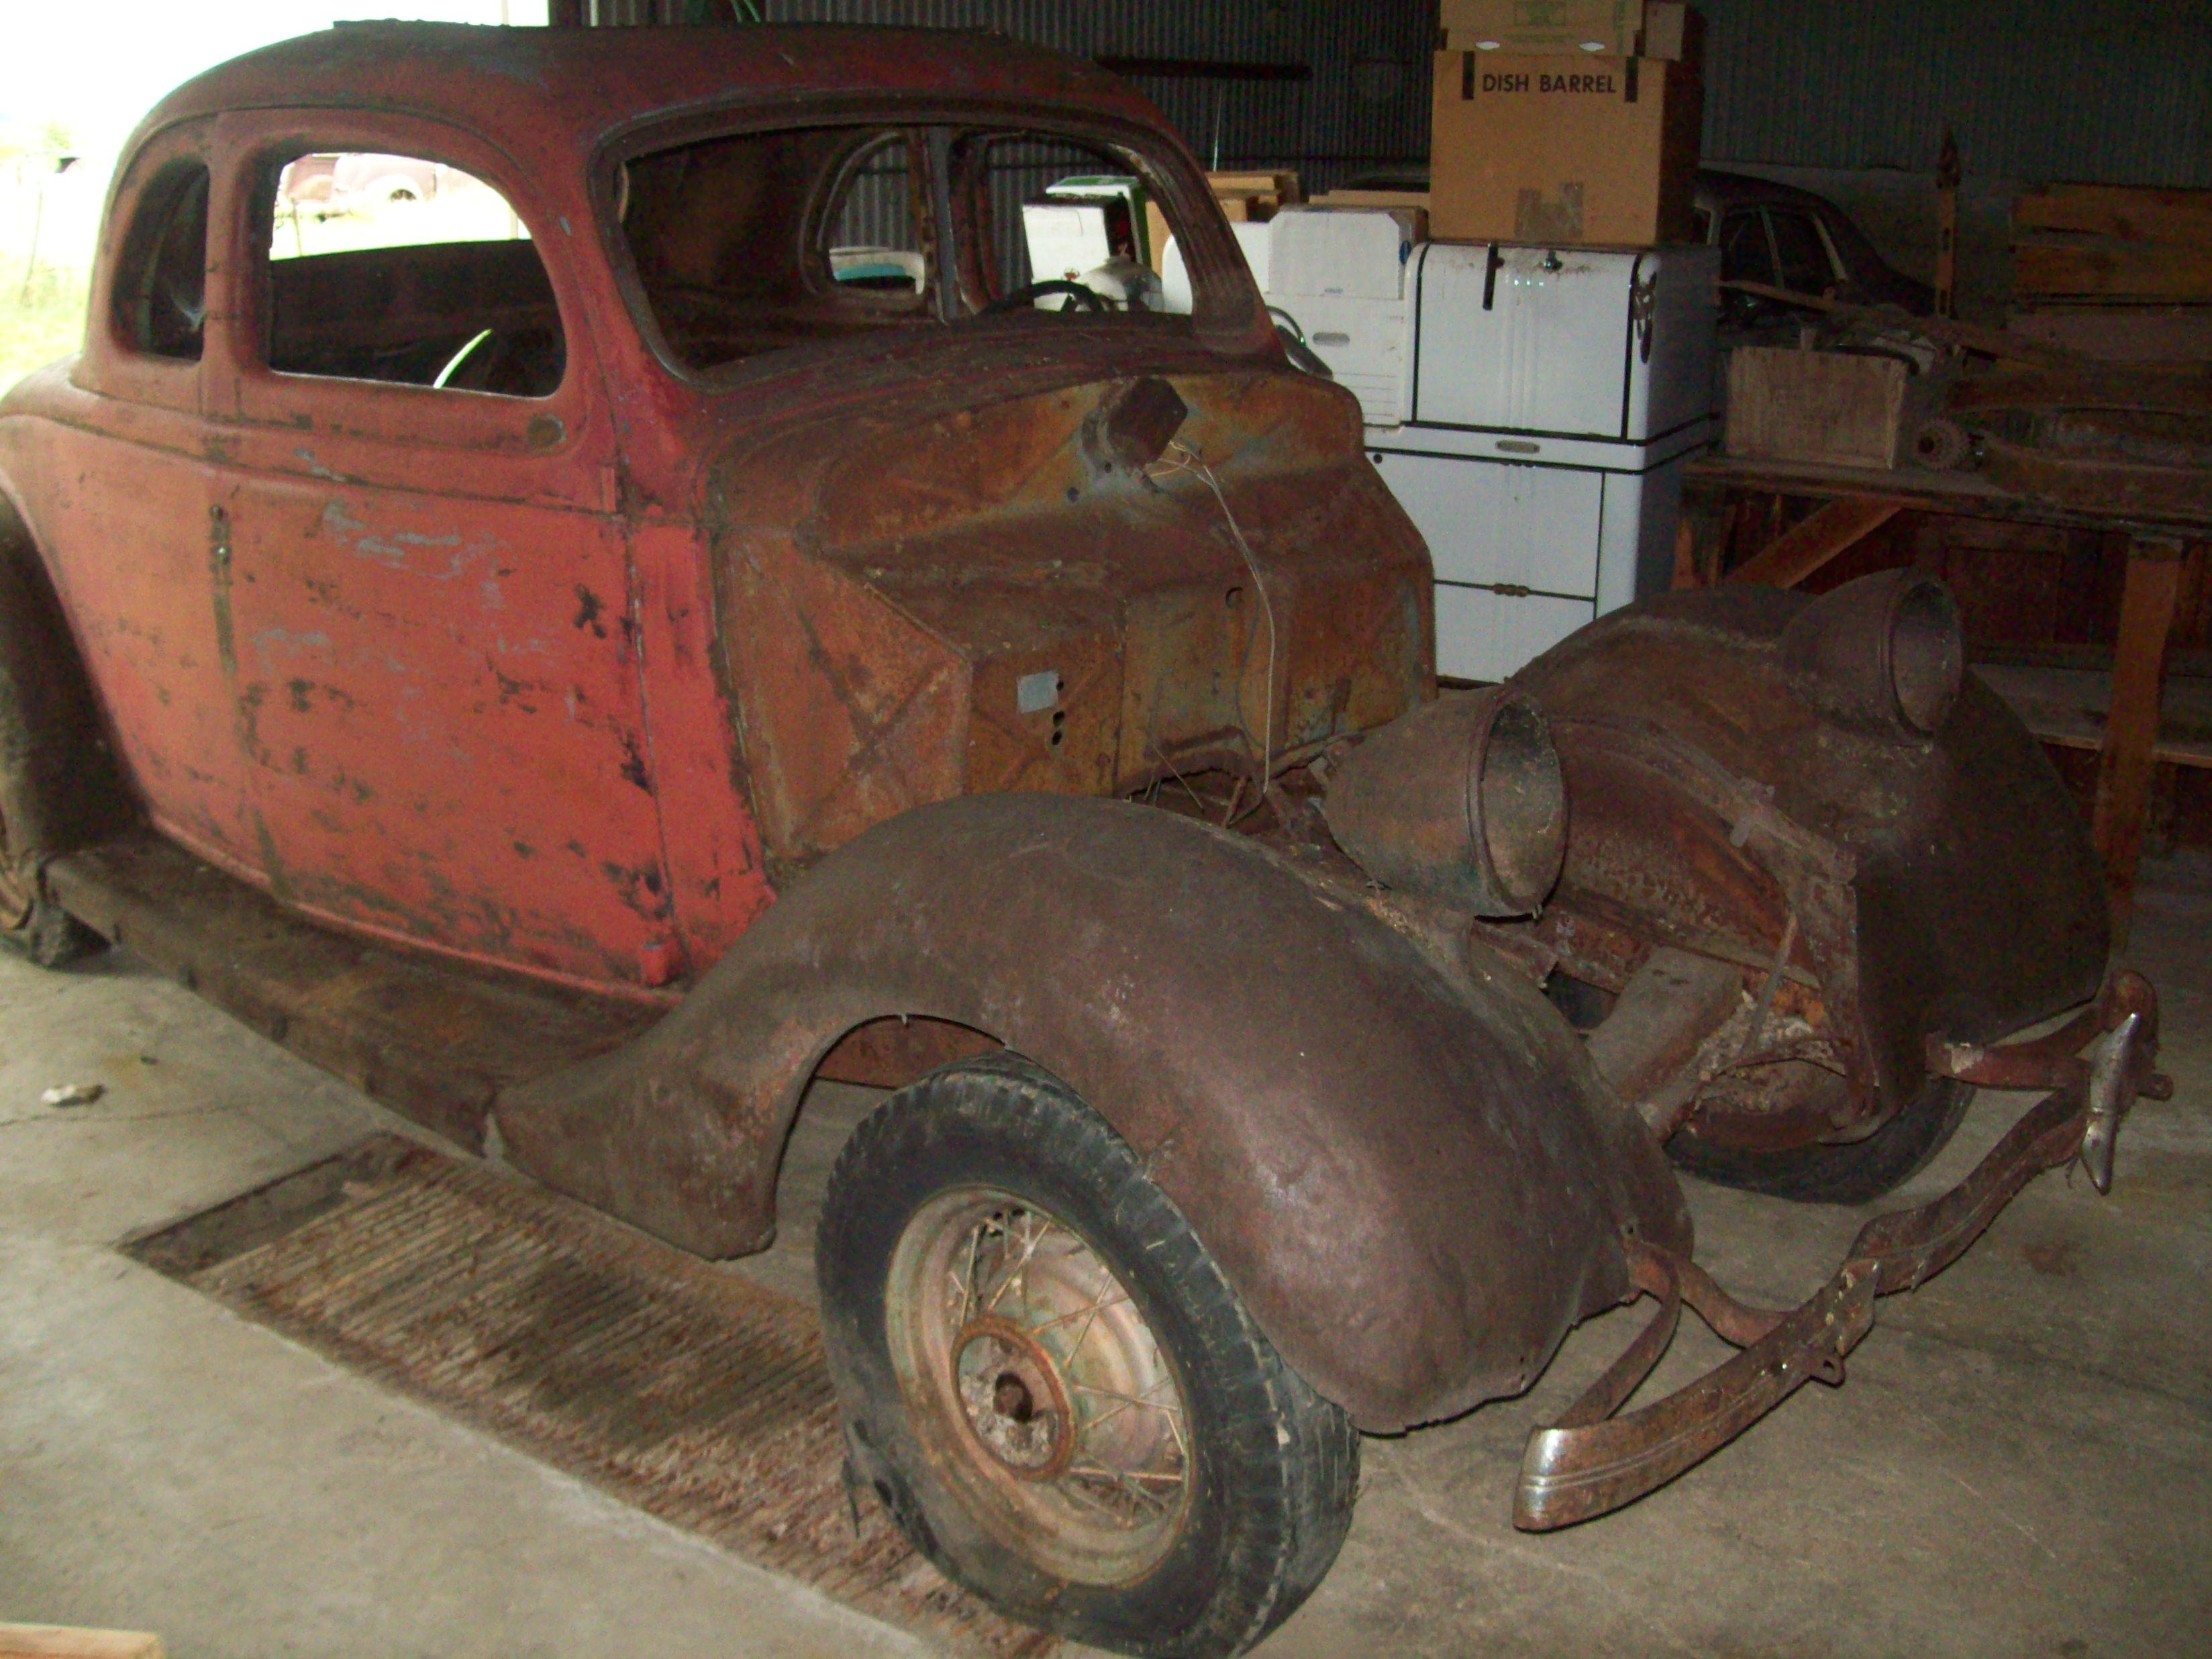 1935/36 Ford 5W coupe body, frame, wheels, fenders. No title-some inner sheet metal cut away